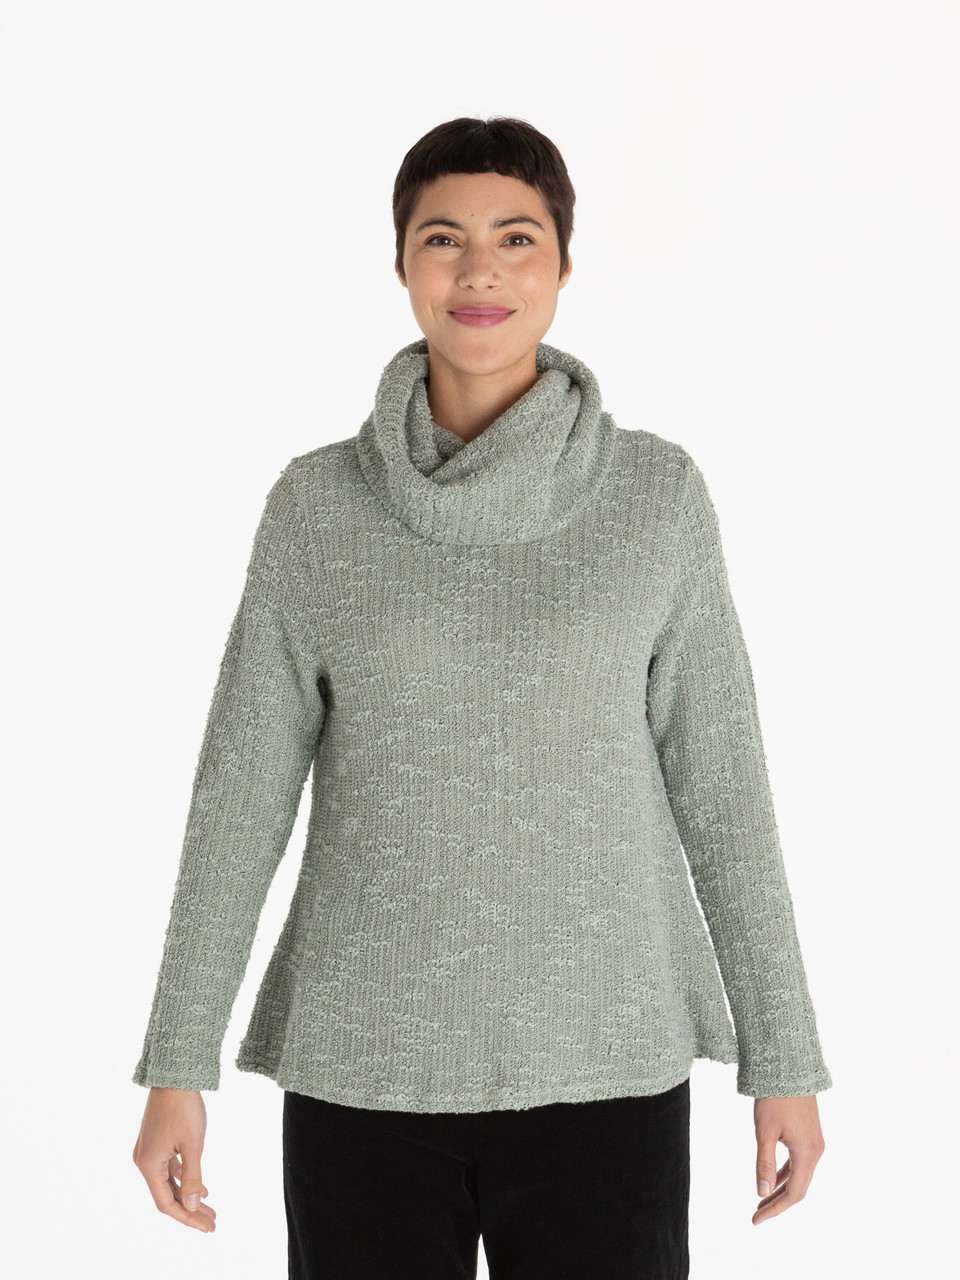 Cut Loose Texture Sweater Cowl Neck Pullover - New Moon Boutique